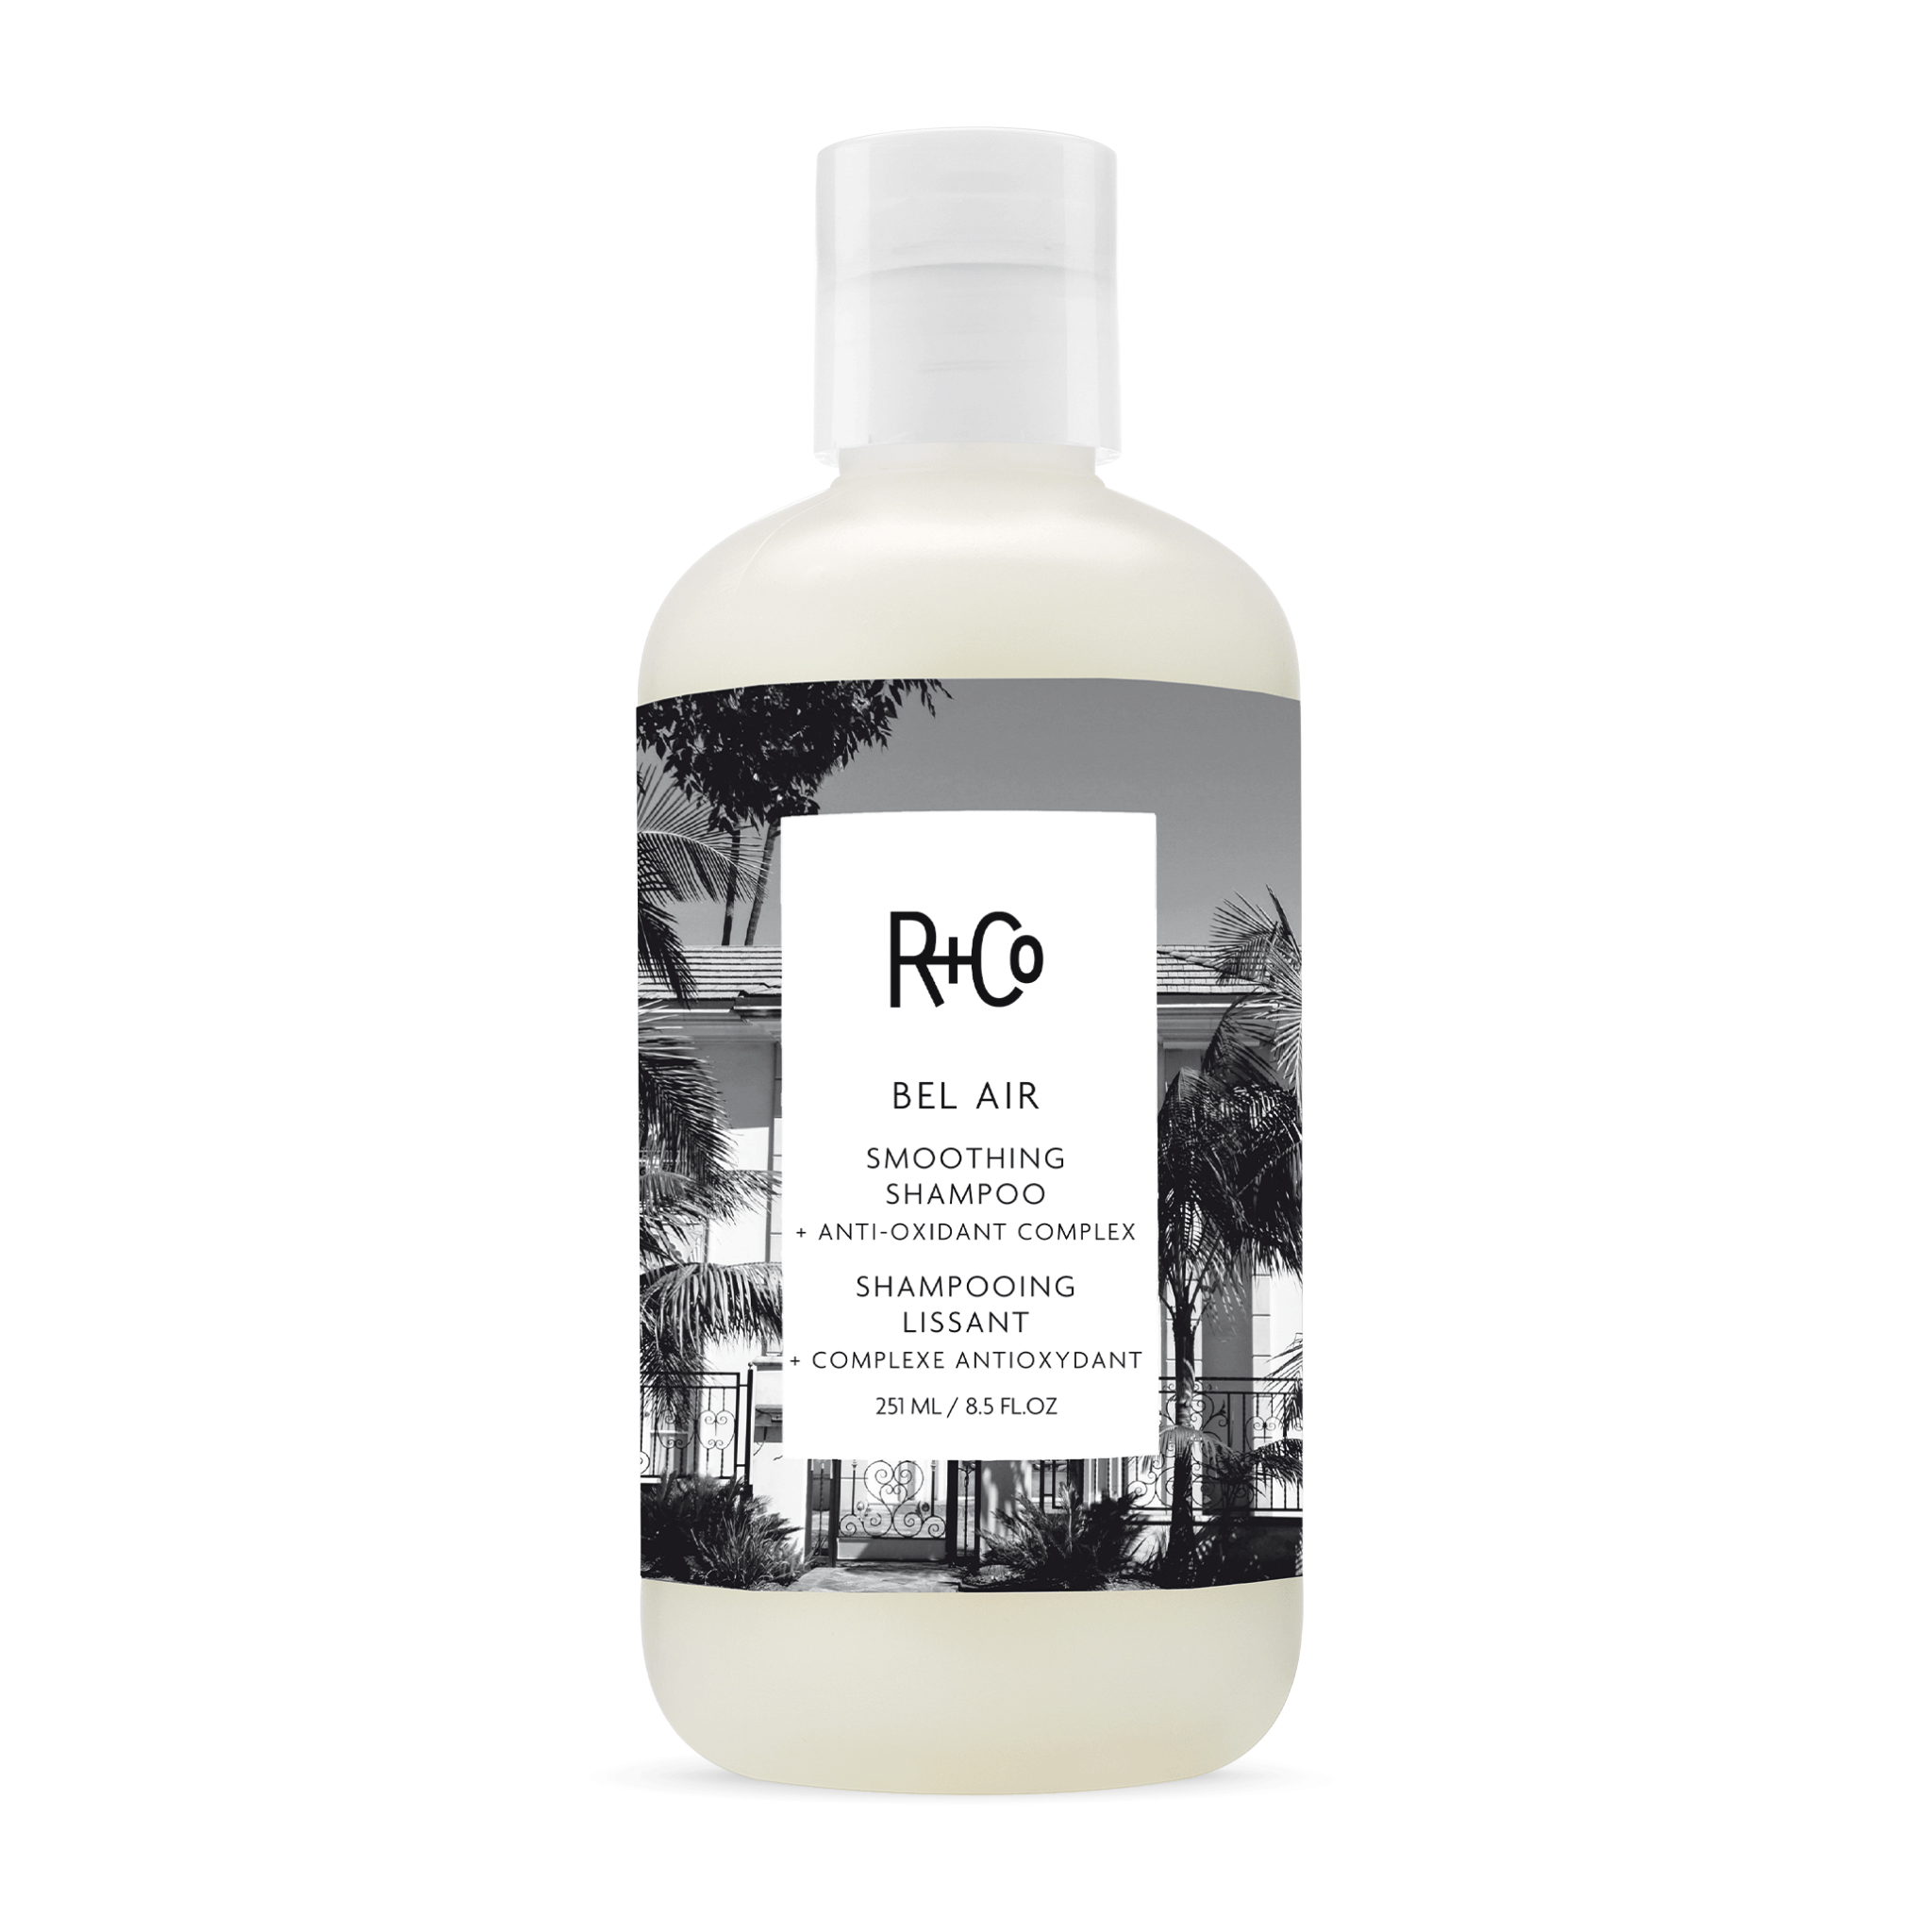 R+Co. Bel Air Shampoing Lissant - 251 ml - Concept C. Shop